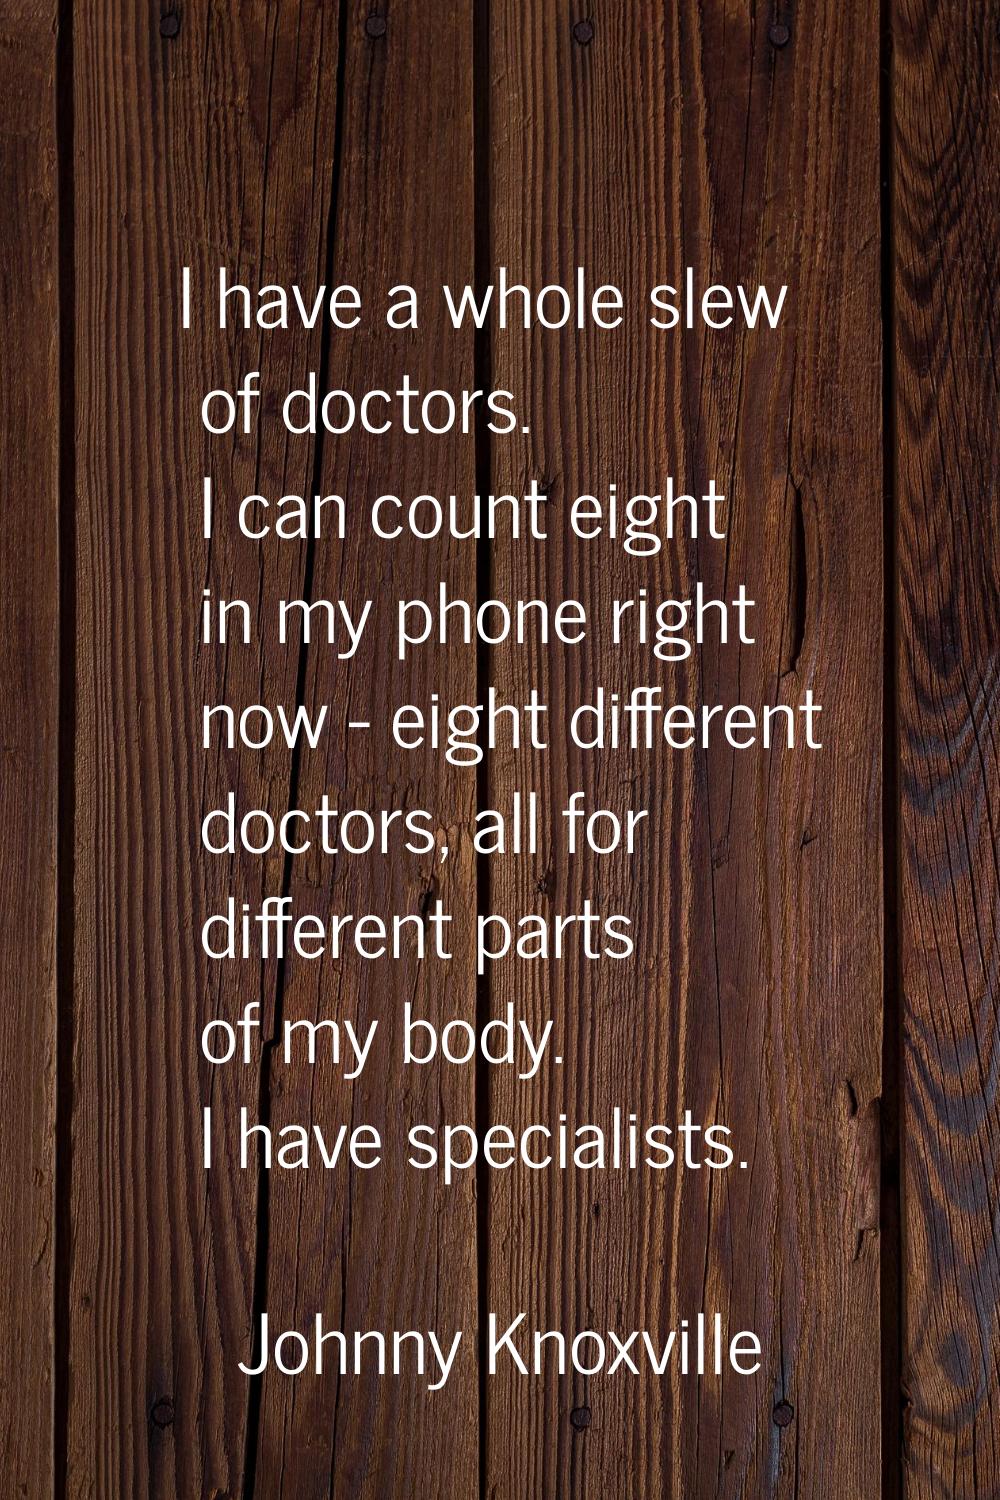 I have a whole slew of doctors. I can count eight in my phone right now - eight different doctors, 